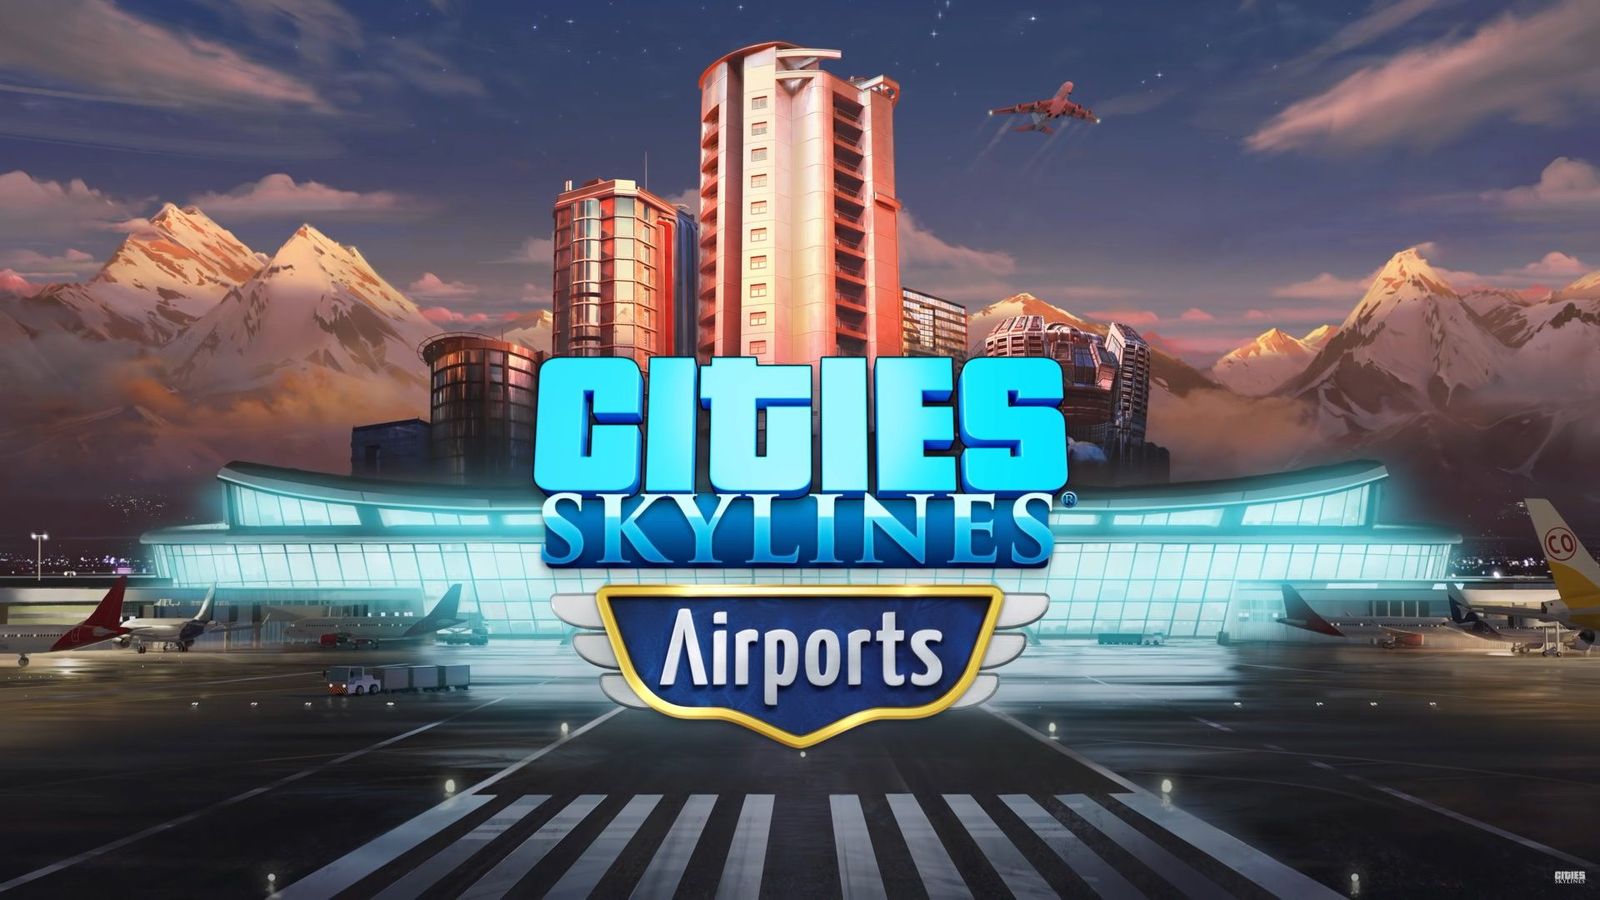 Cities Skylines: New Expansion Announced - Airports